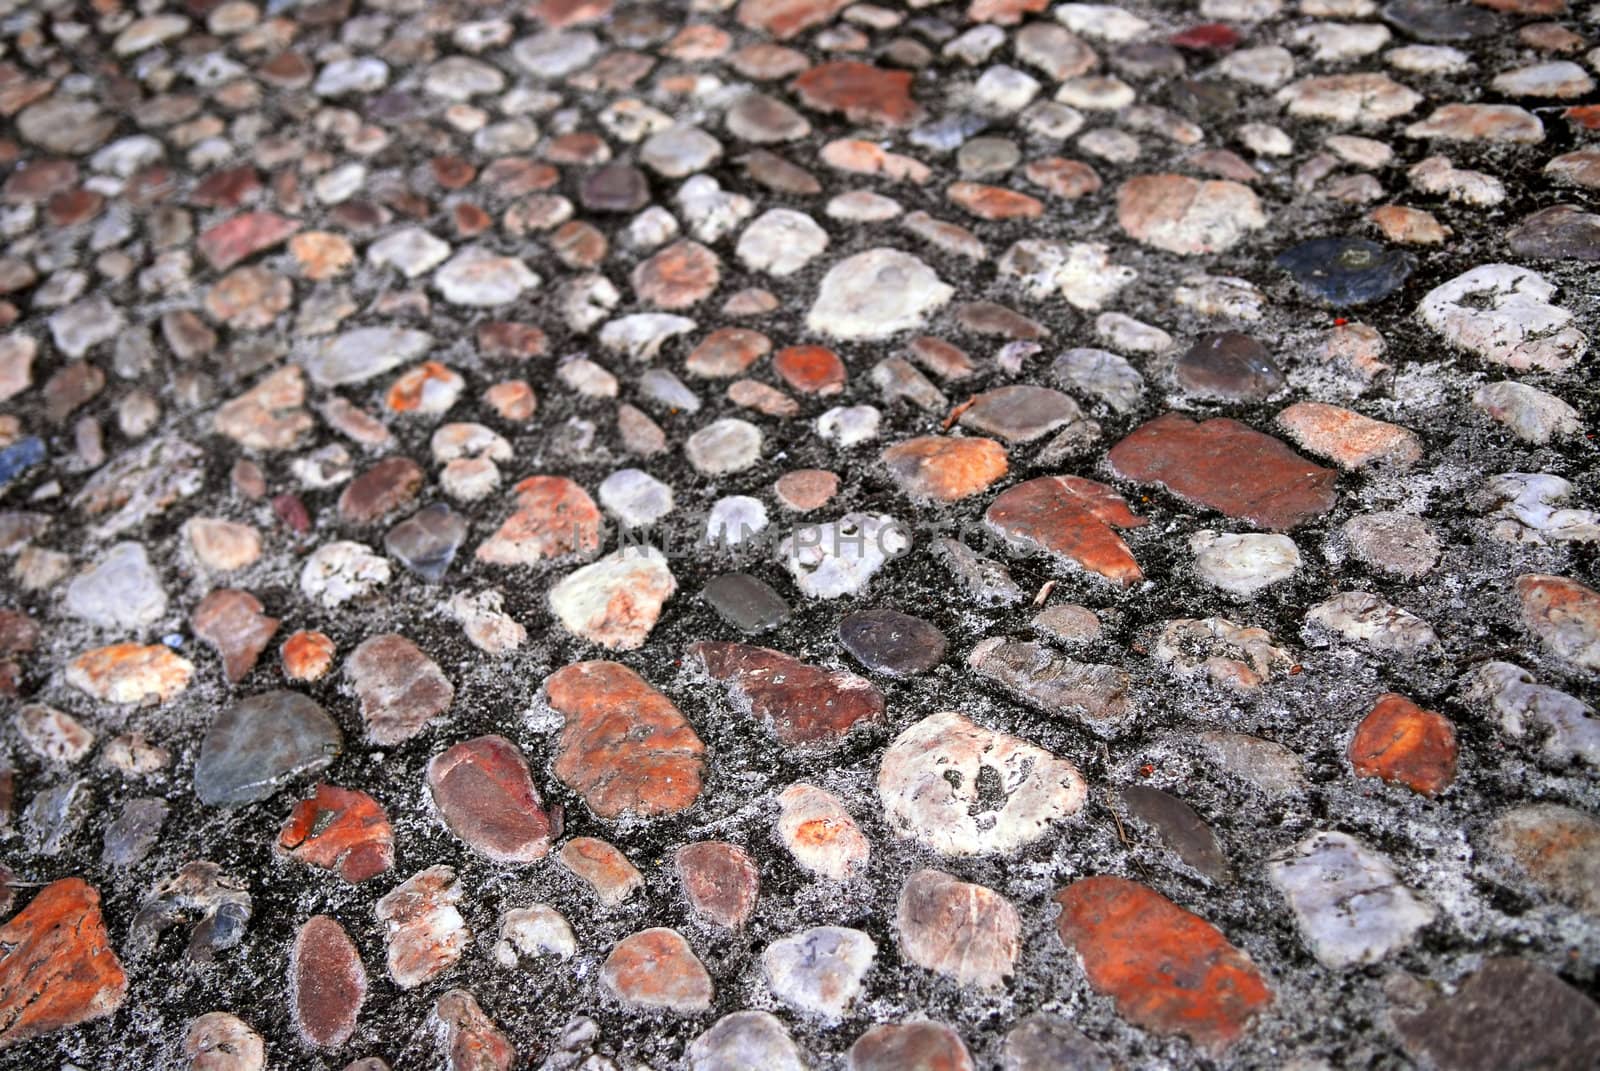 Abstract background of old medieval cobblestone pavement